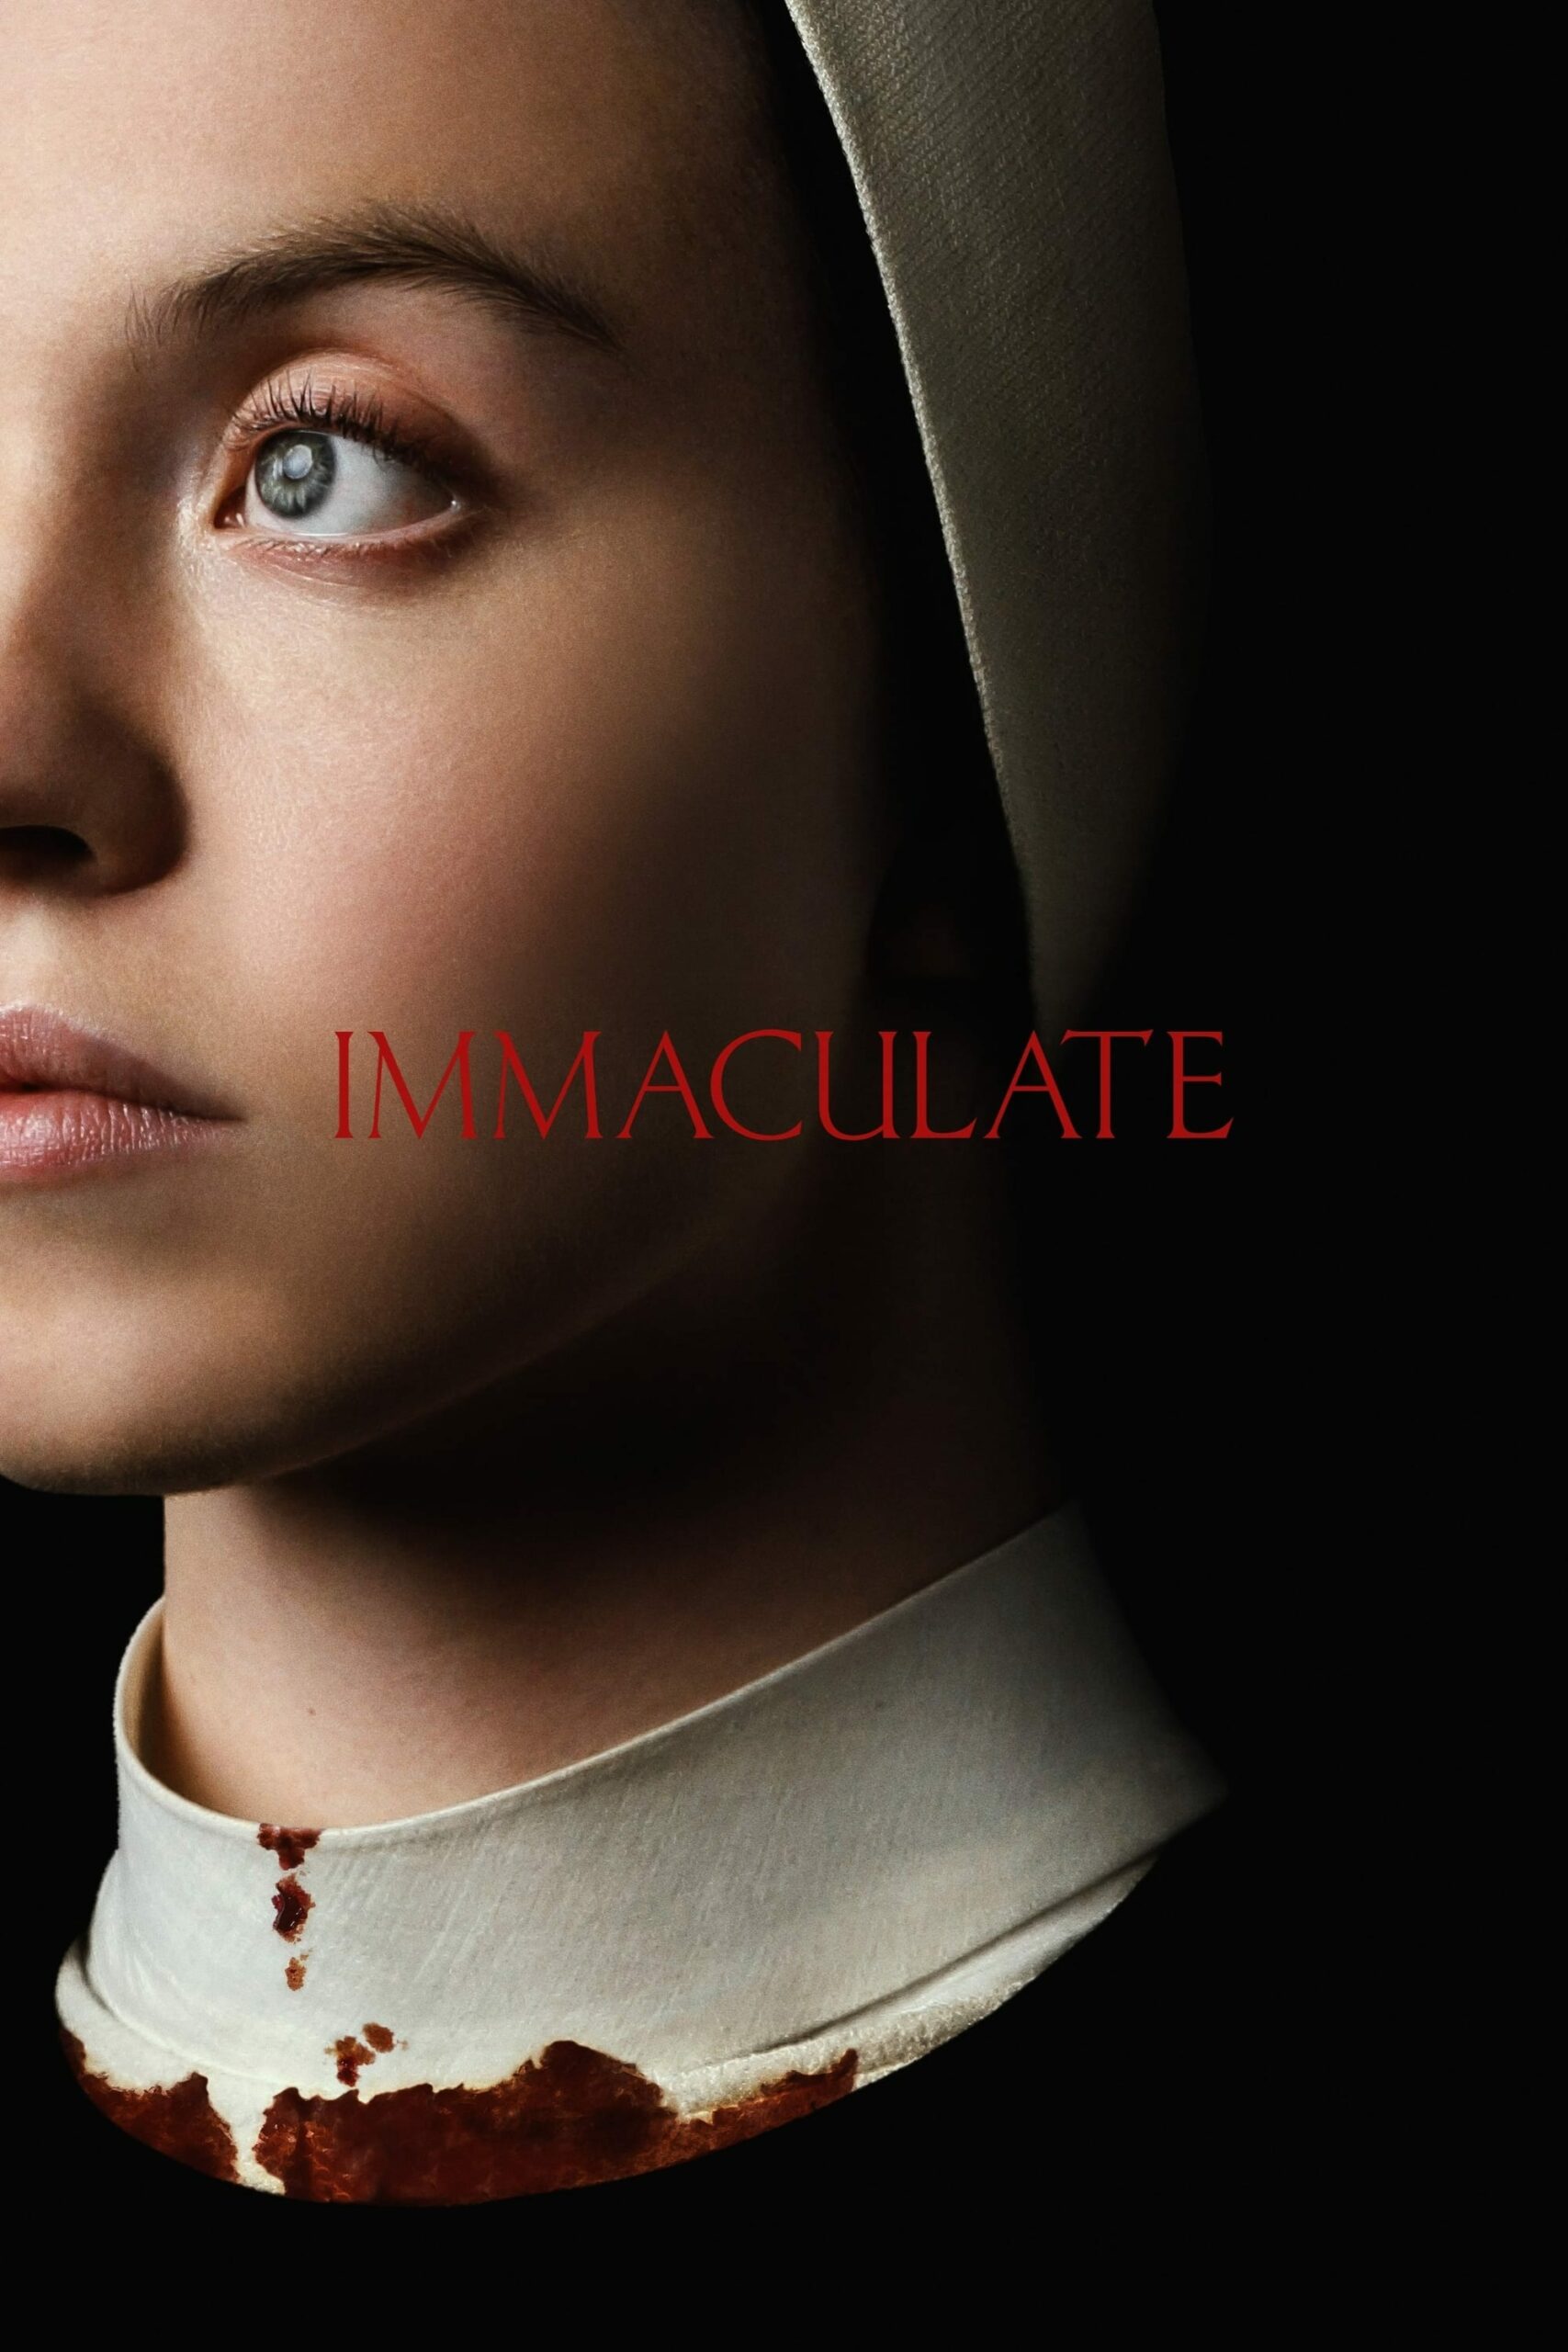 Poster for "Immaculate"